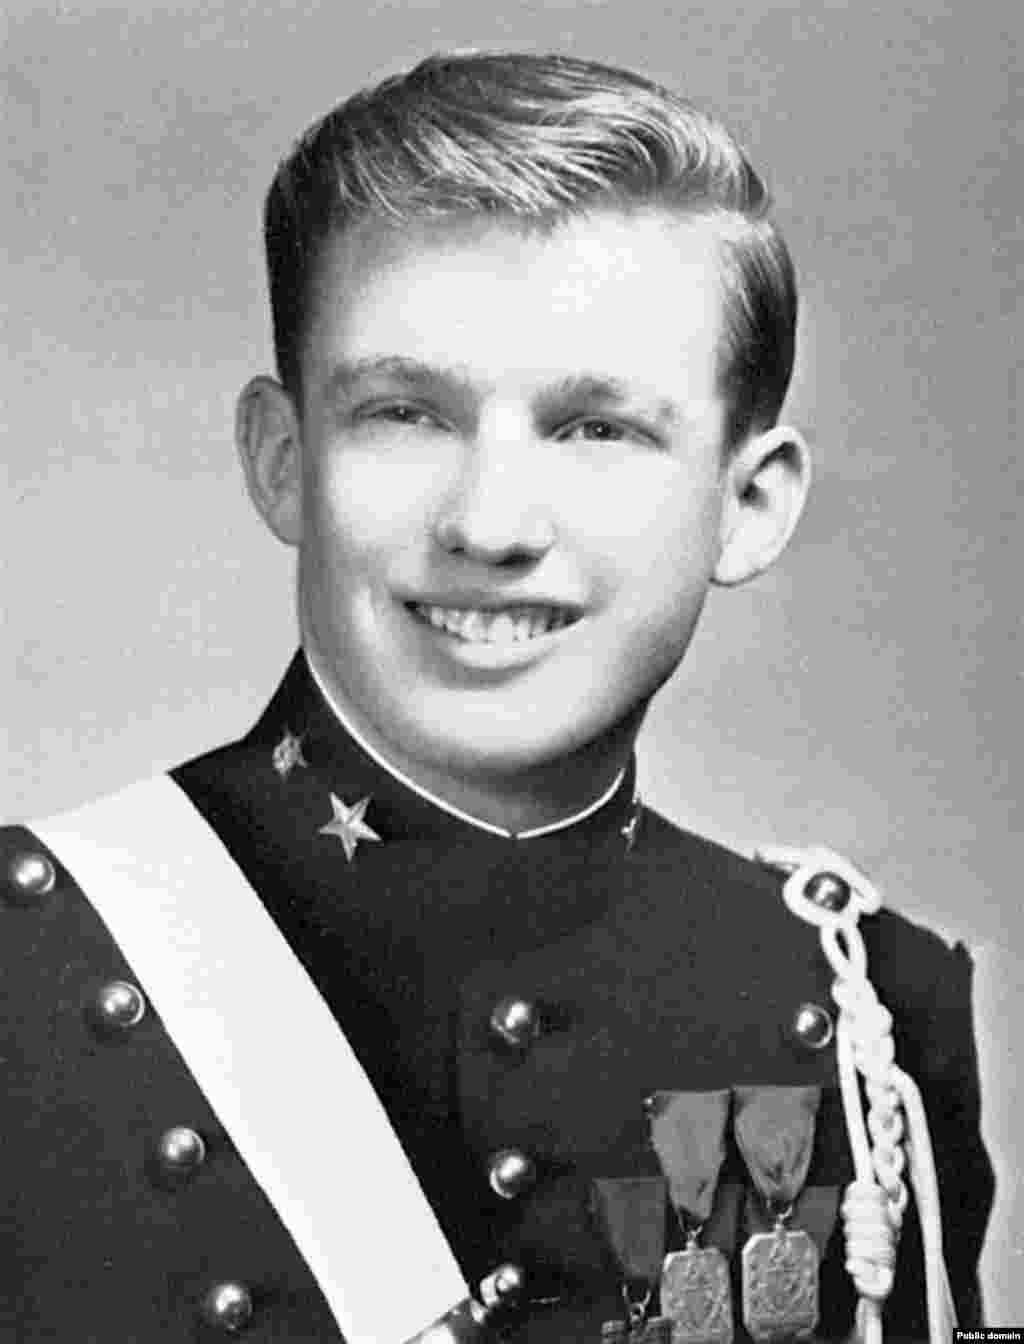 Trump as a teenage cadet at the New York Military Academy